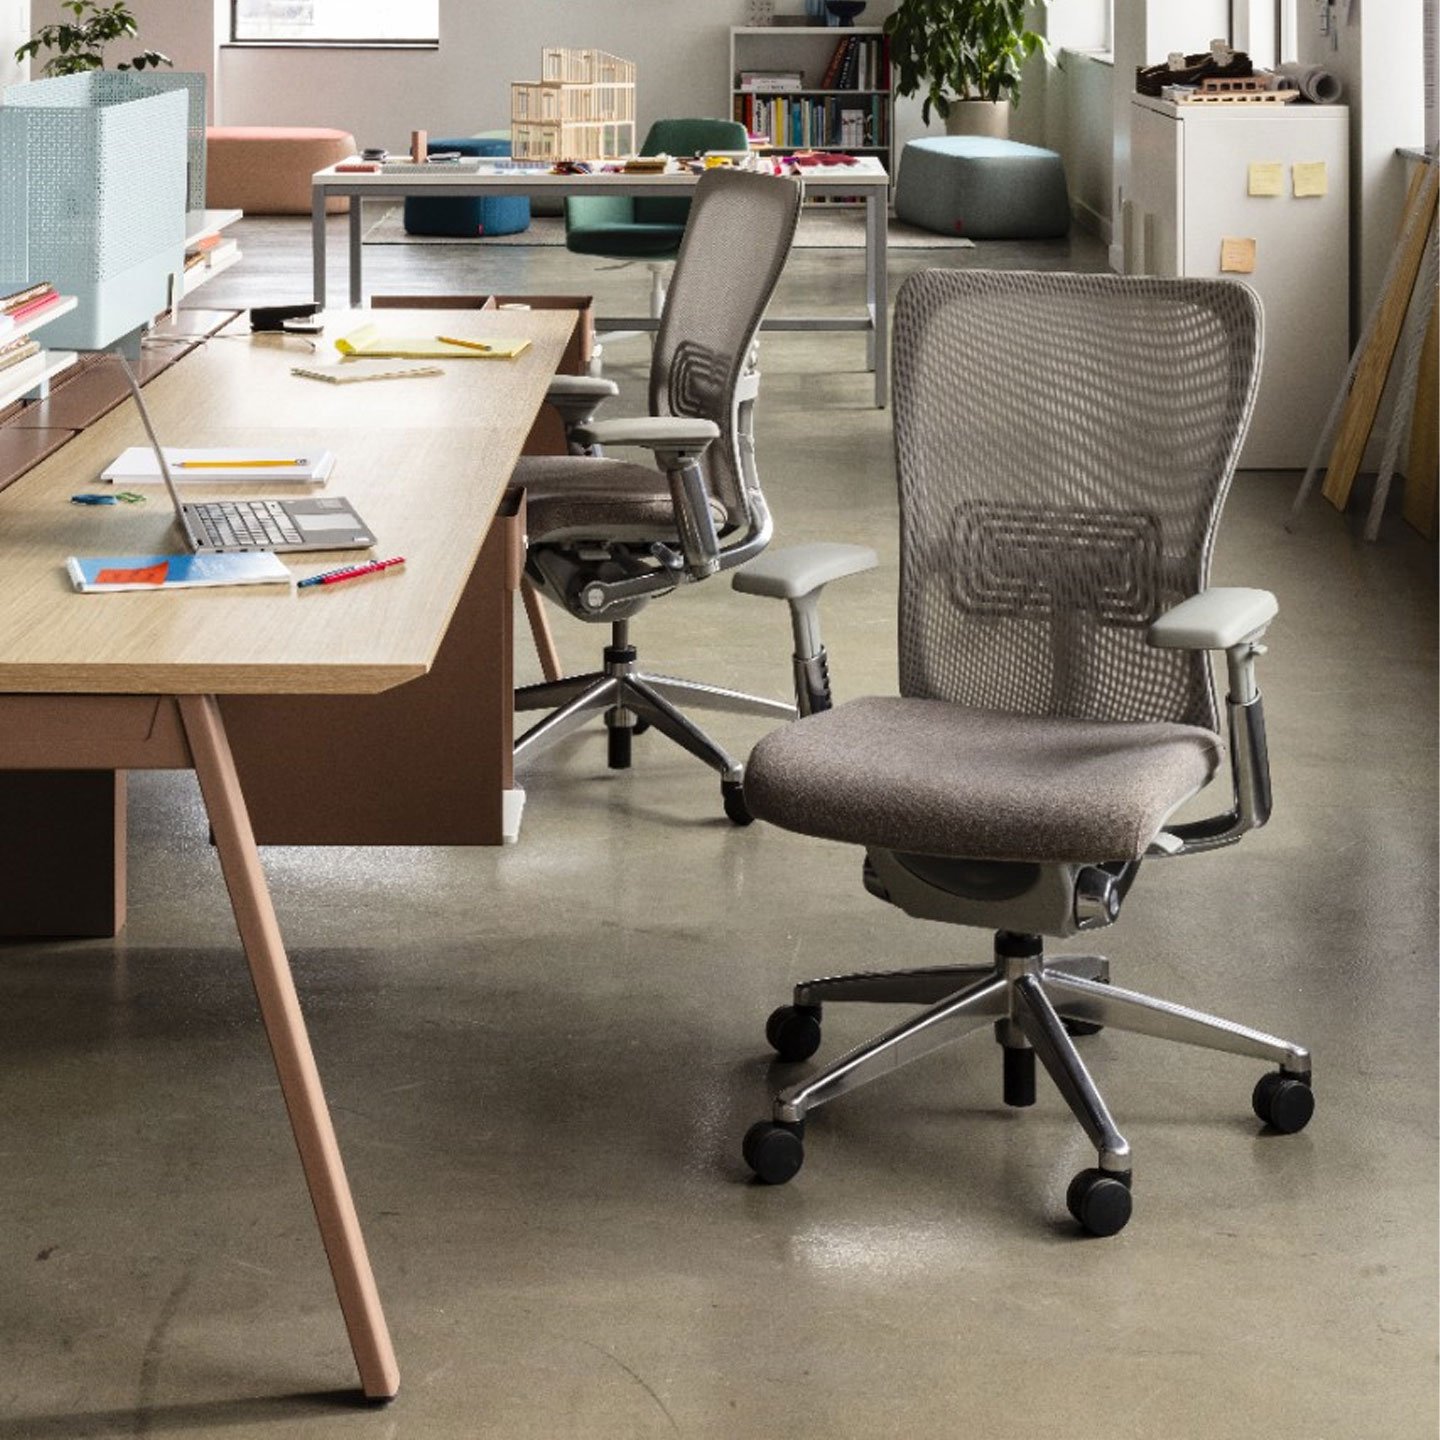 Haworth Intuity Workspace divider in office setting with wood desks and haworth chairs 